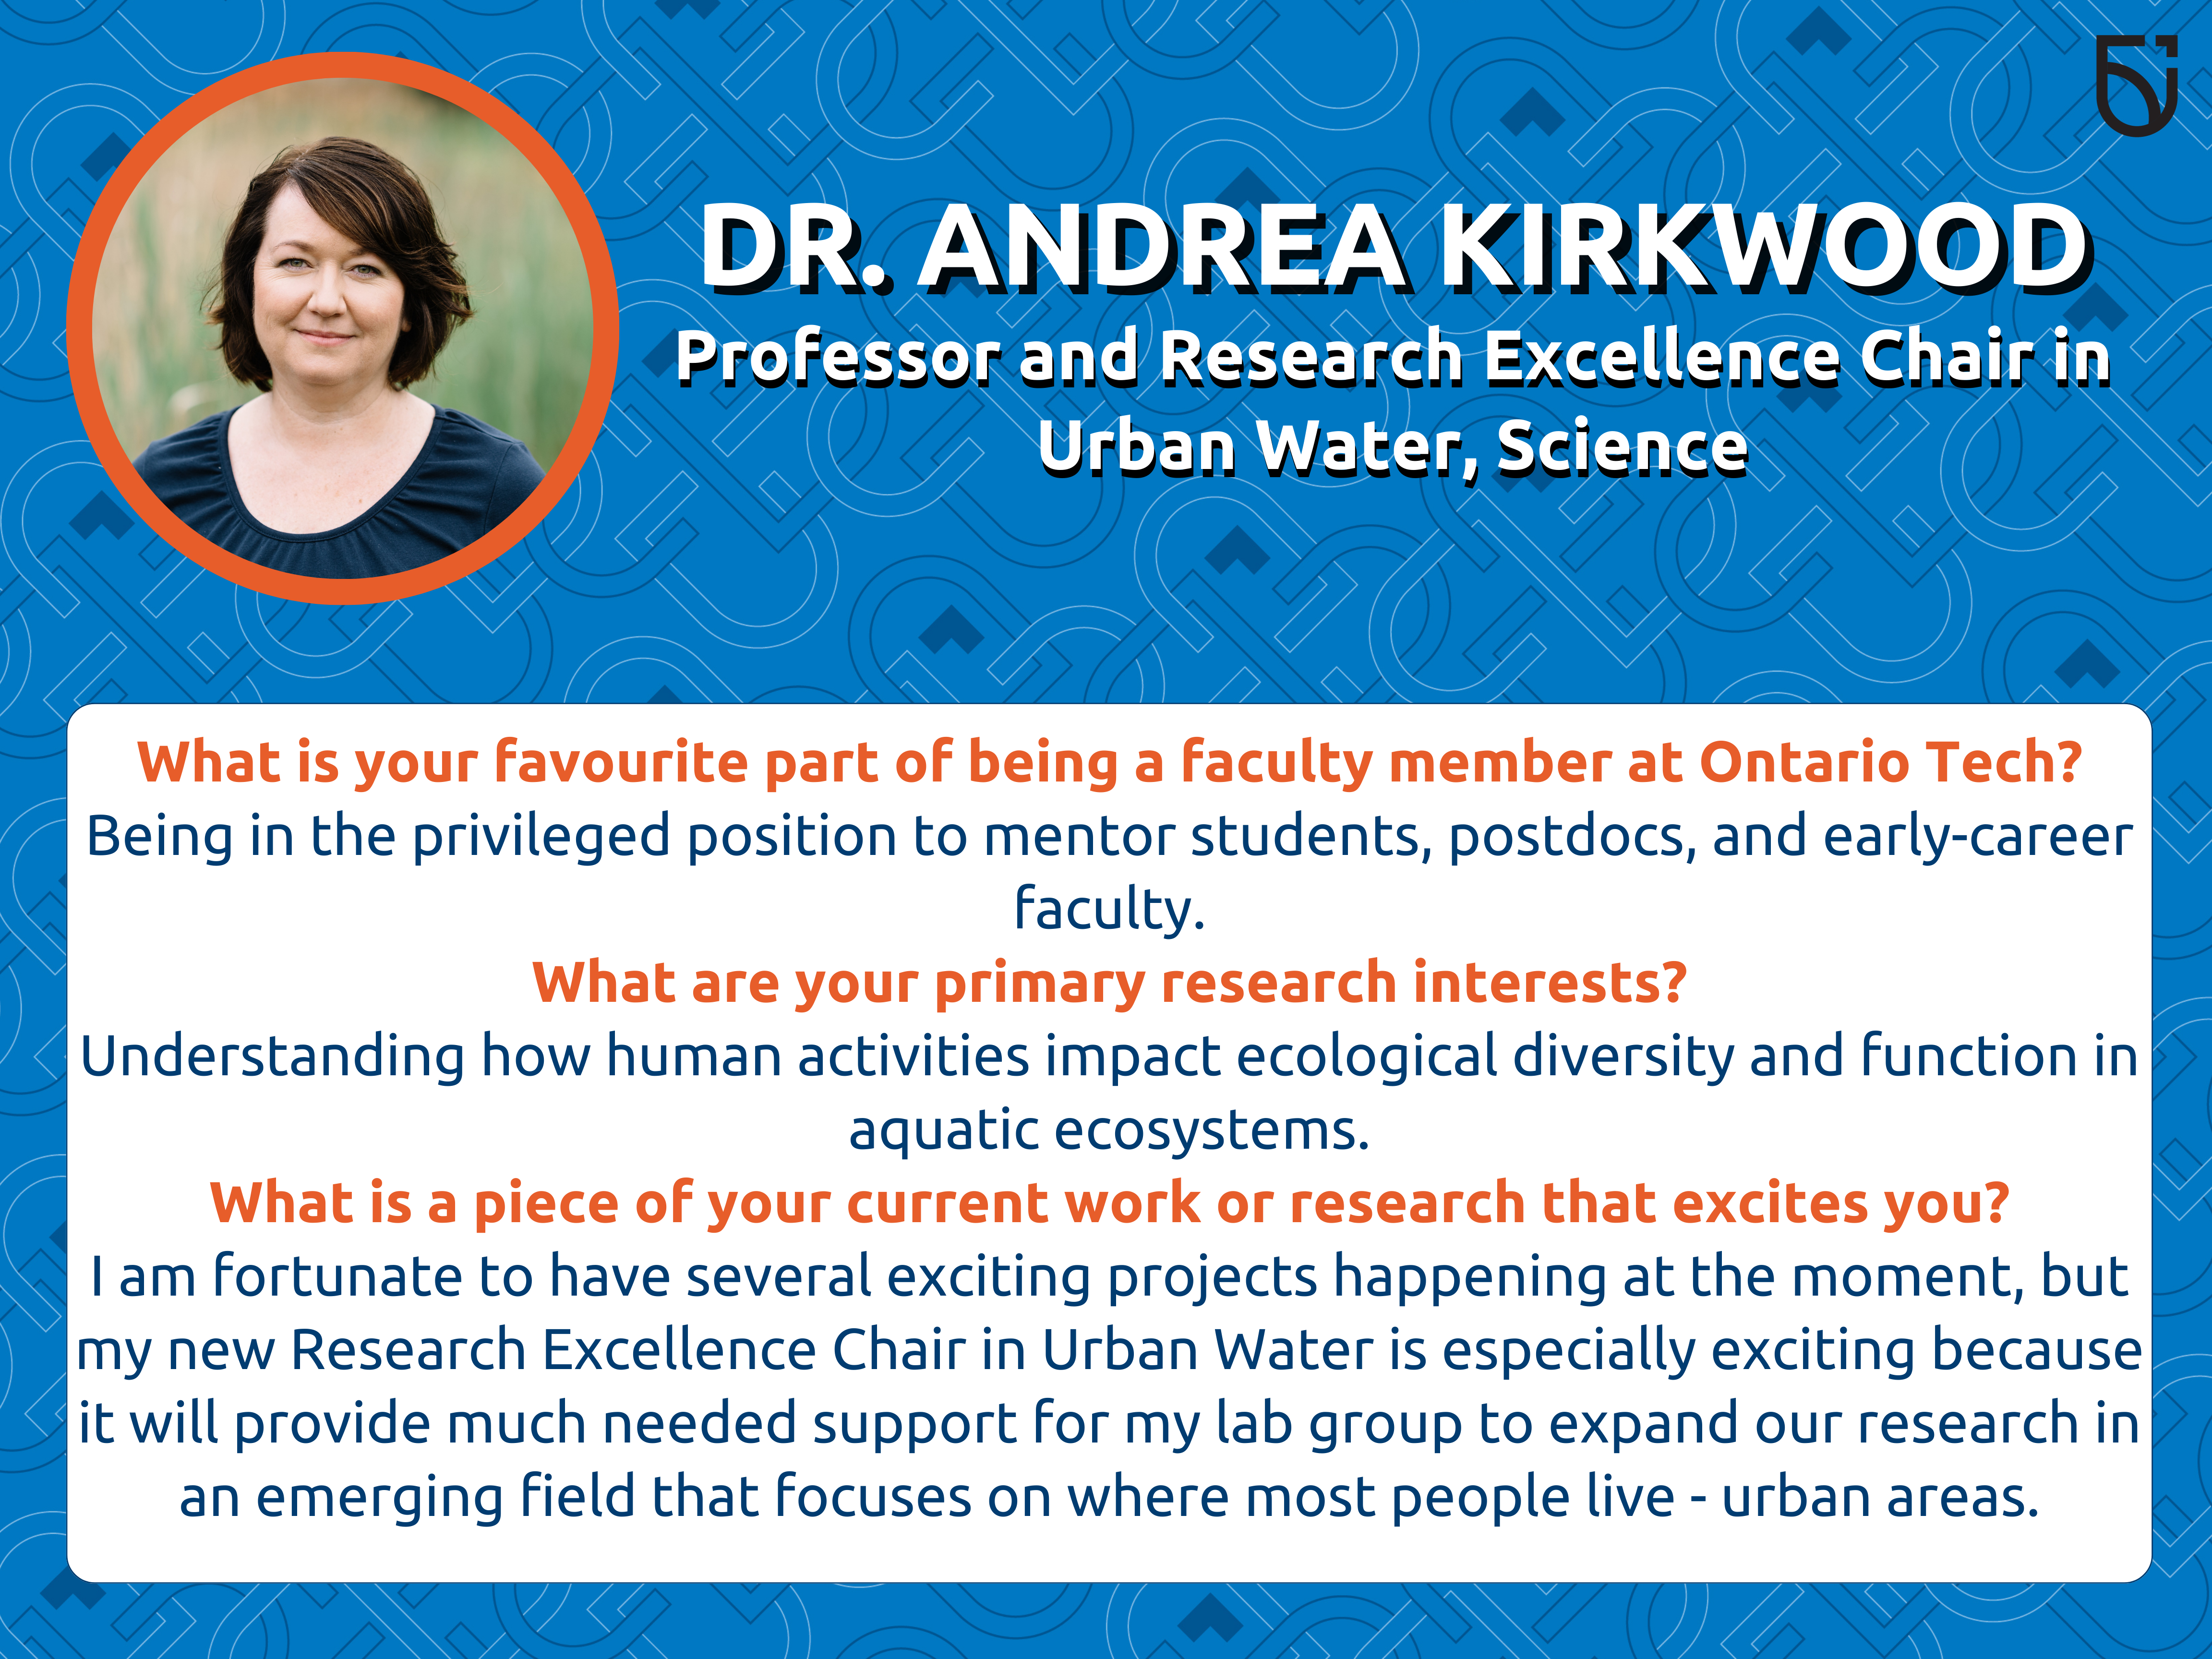 This photo is a Women’s Wednesday feature of Dr. Andrea Kirkwood, a Professor in the Faculty of Science